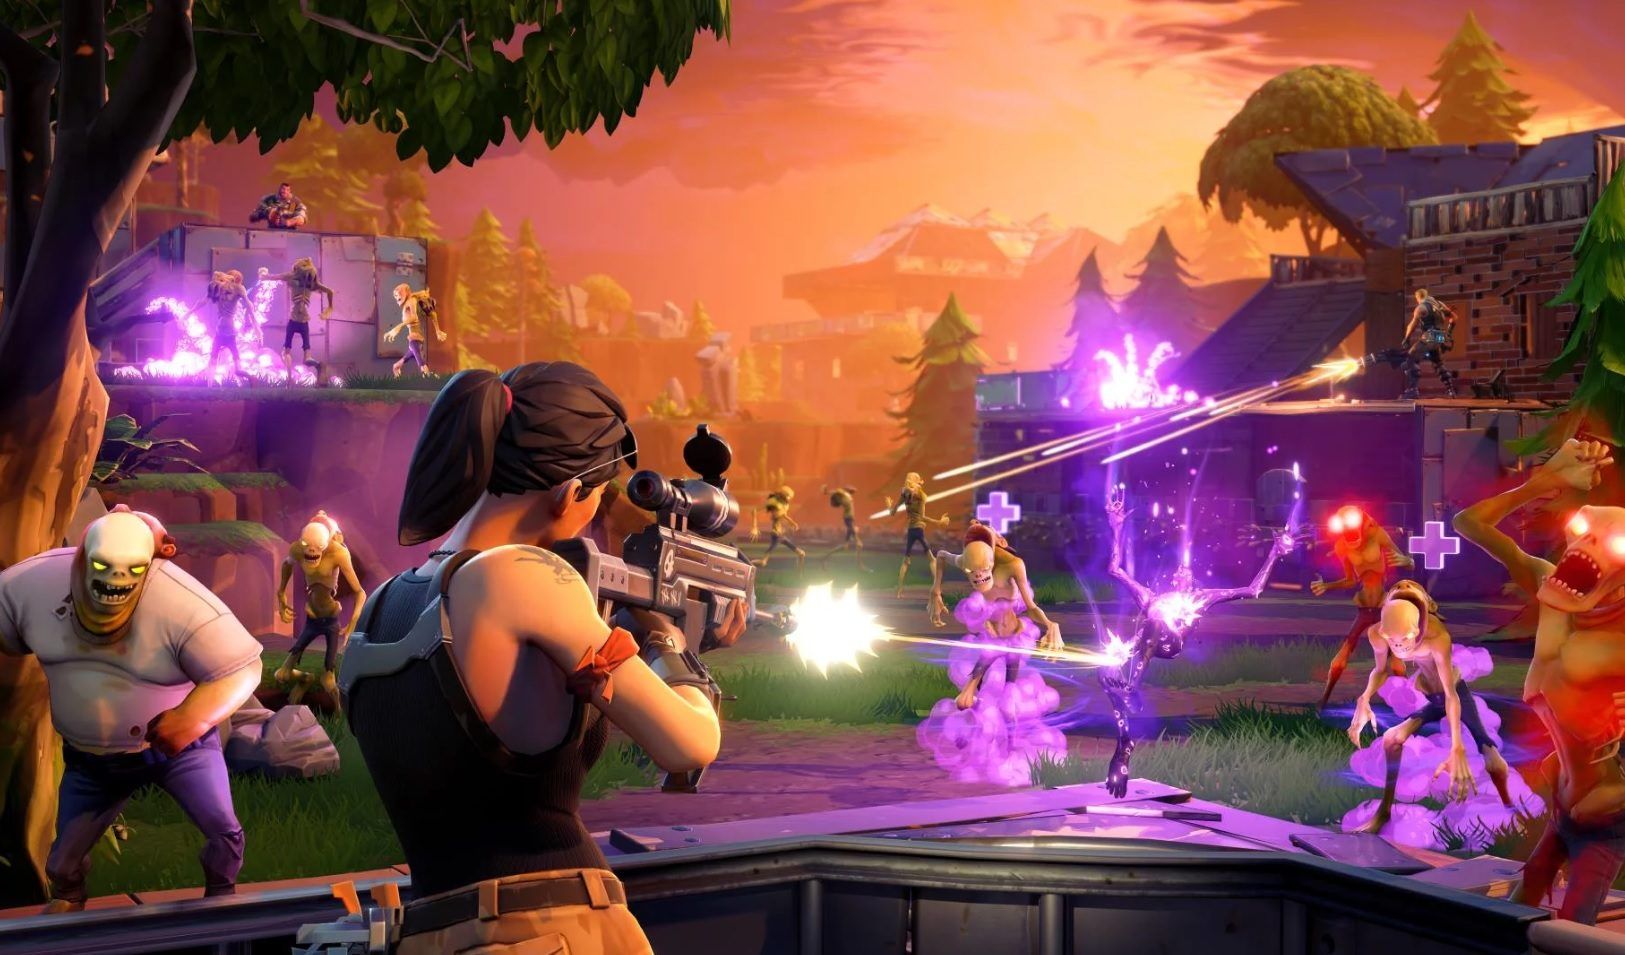 [Updated] Report: Fortnite Save the World Is Now Free to Play